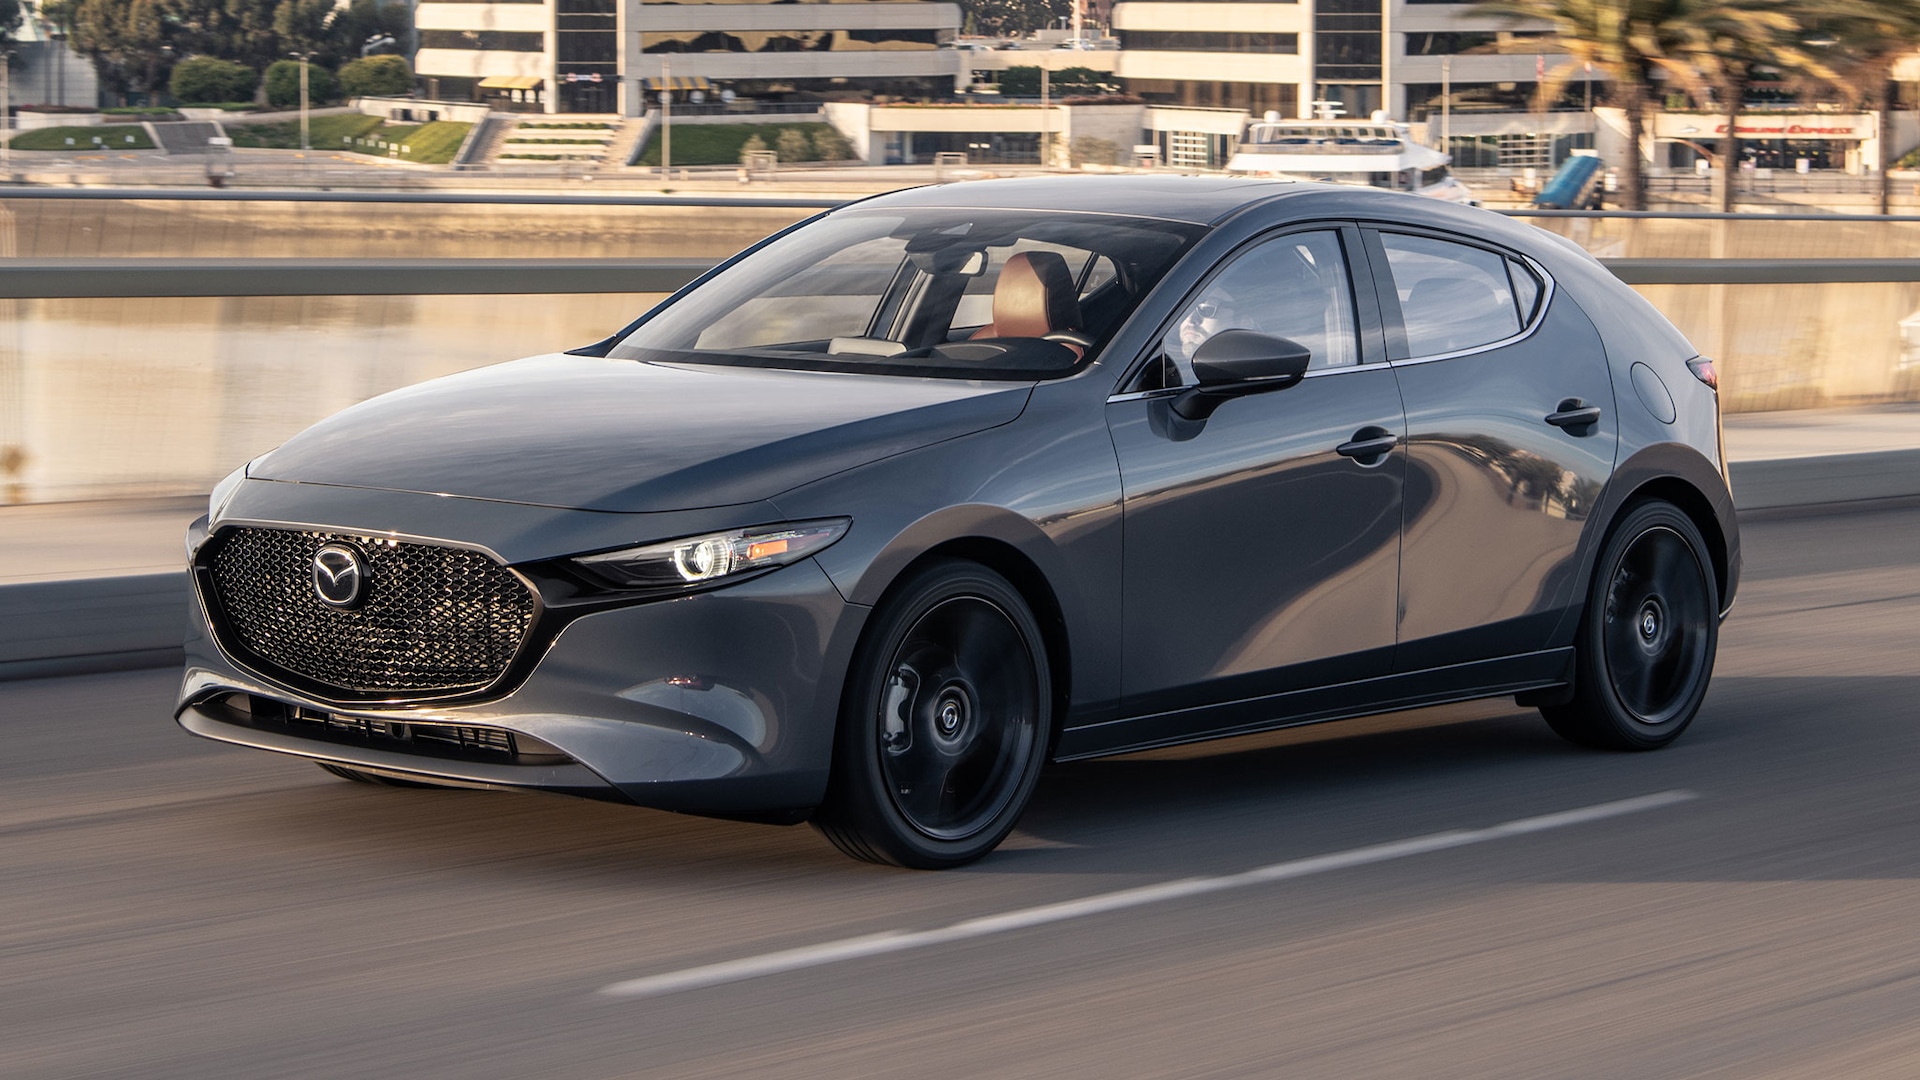 2020 Mazda3 Long-Term Update 1: Sights and Sounds